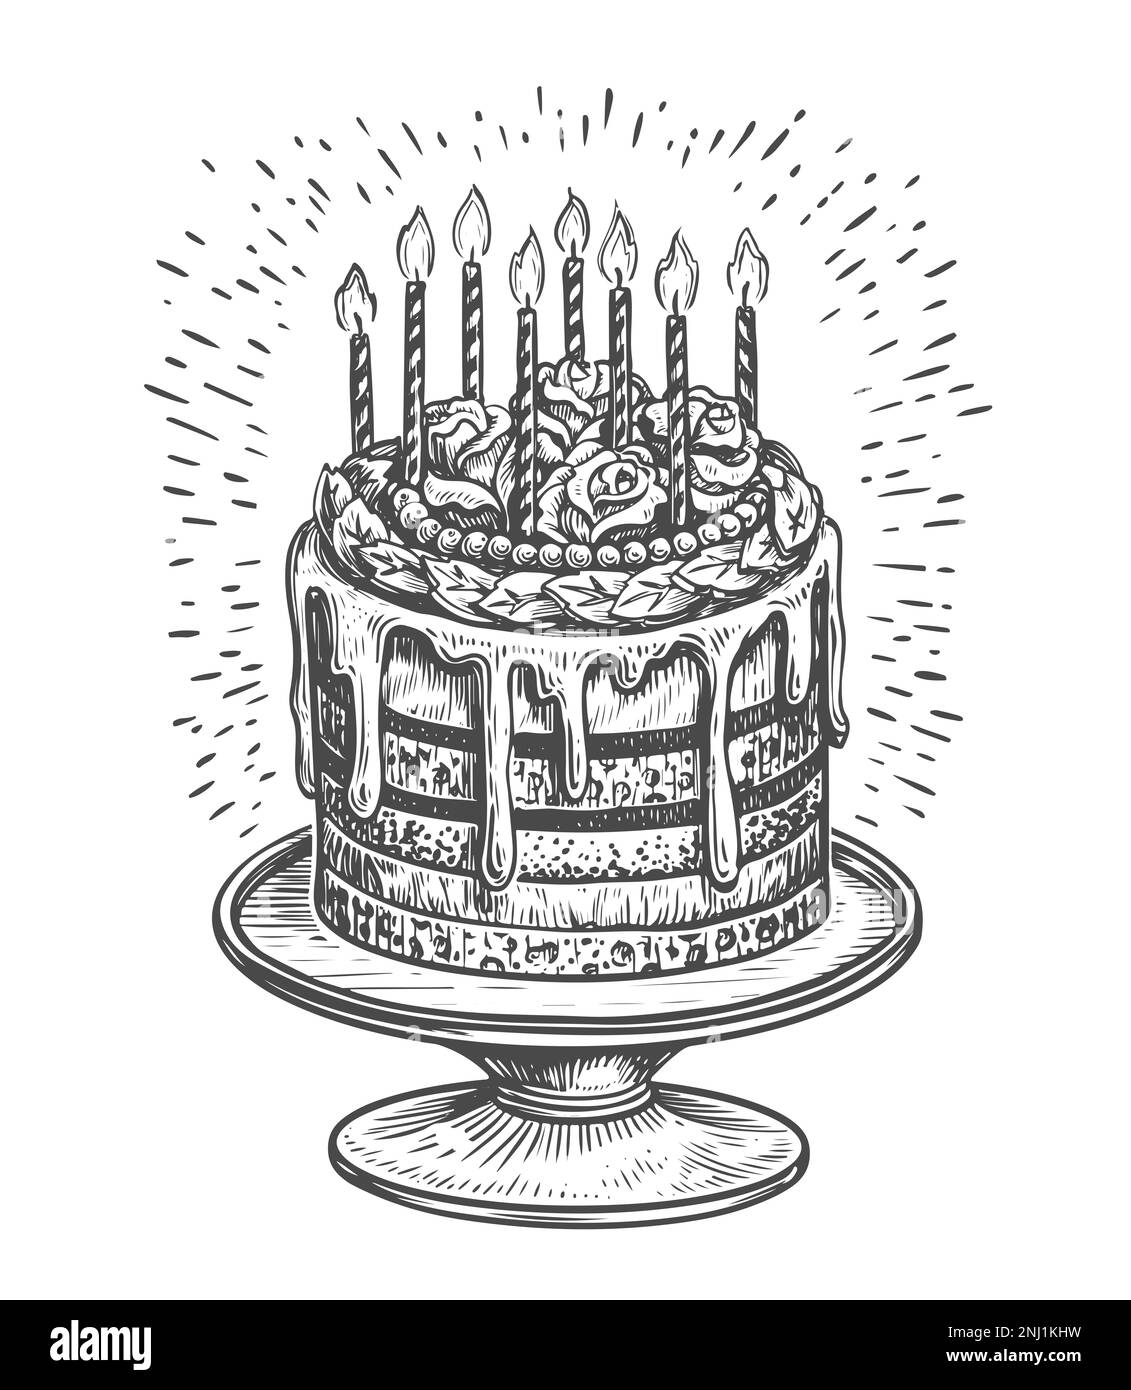 Big sweet cake with burning candles on a stand. Birthday, celebration concept. Vintage sketch illustration Stock Photo